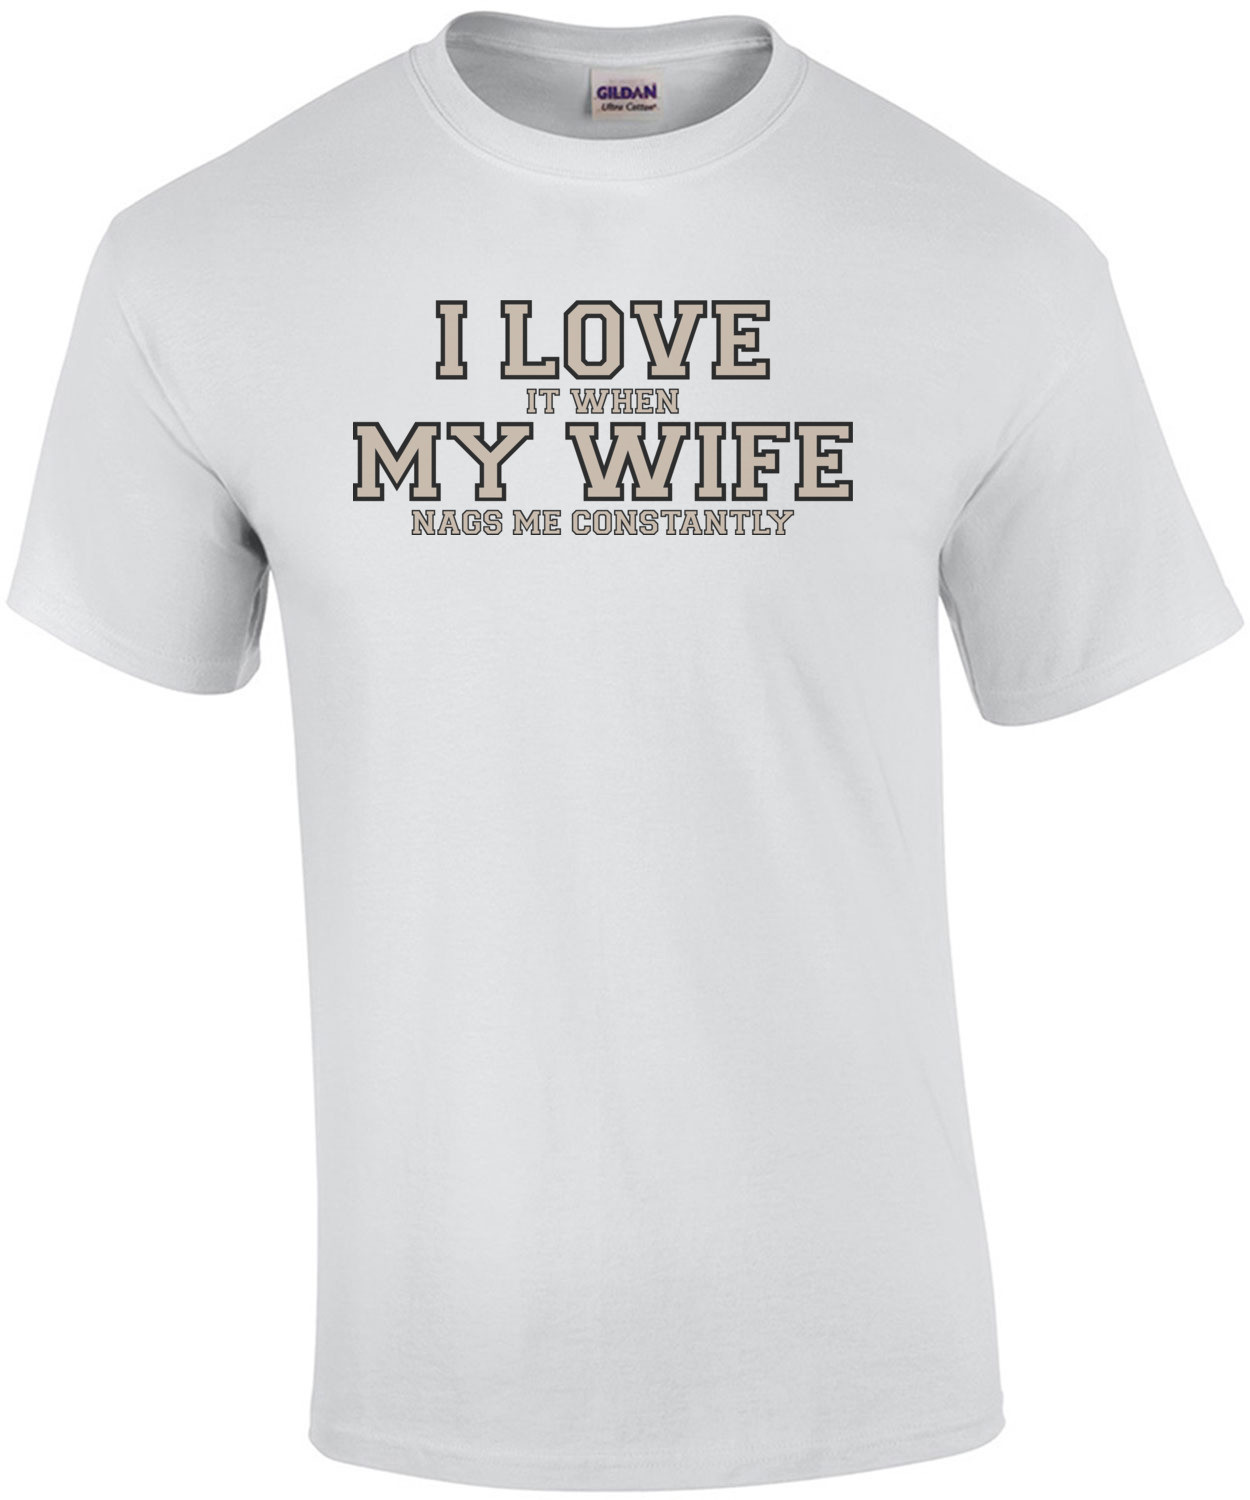 I love it when my wife nags me constantly - Funny T-Shirt